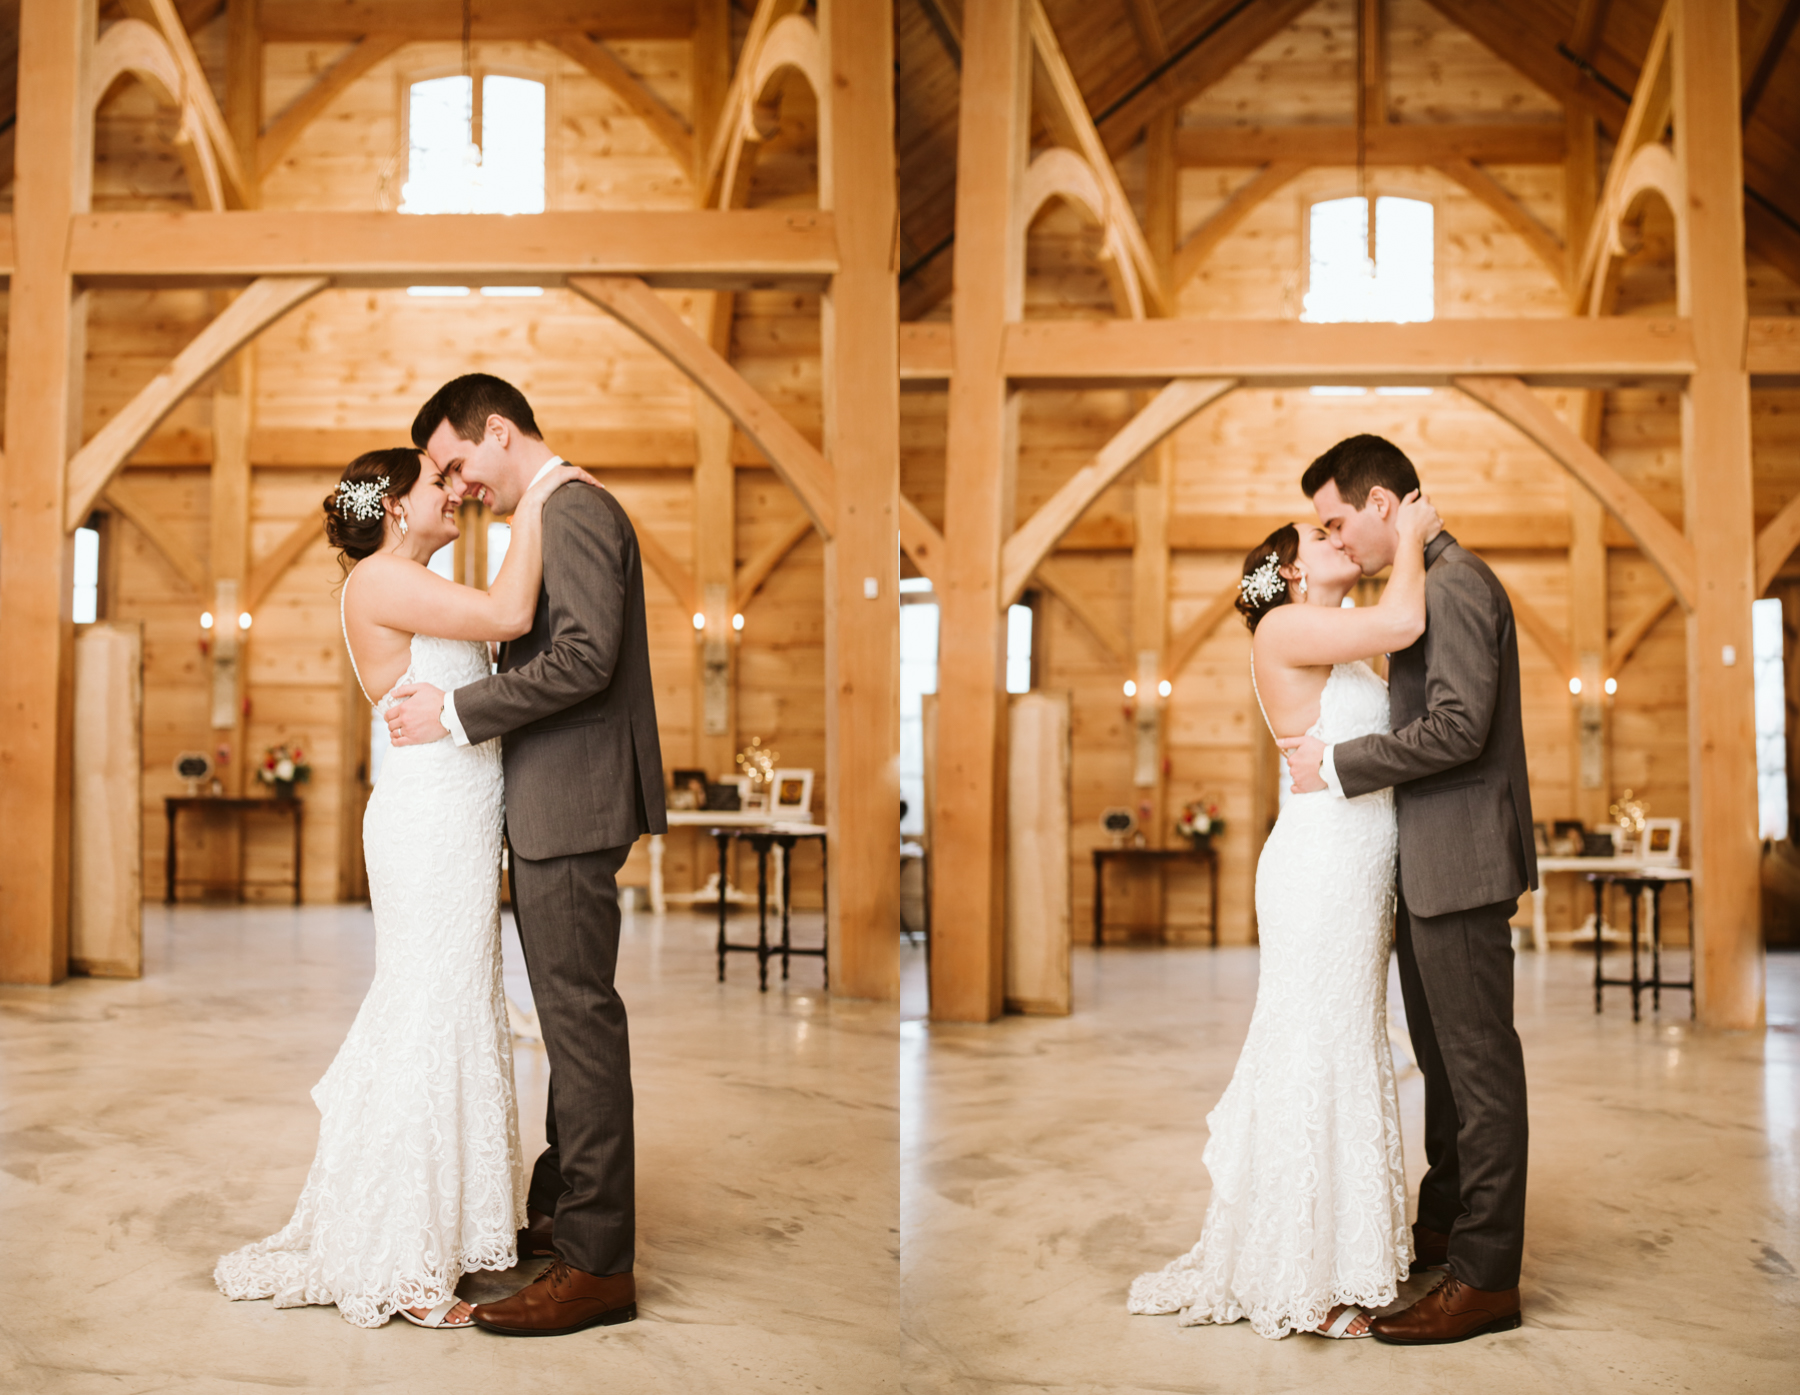 Bride and groom's first dance inside the reception hall at stone house of st charles